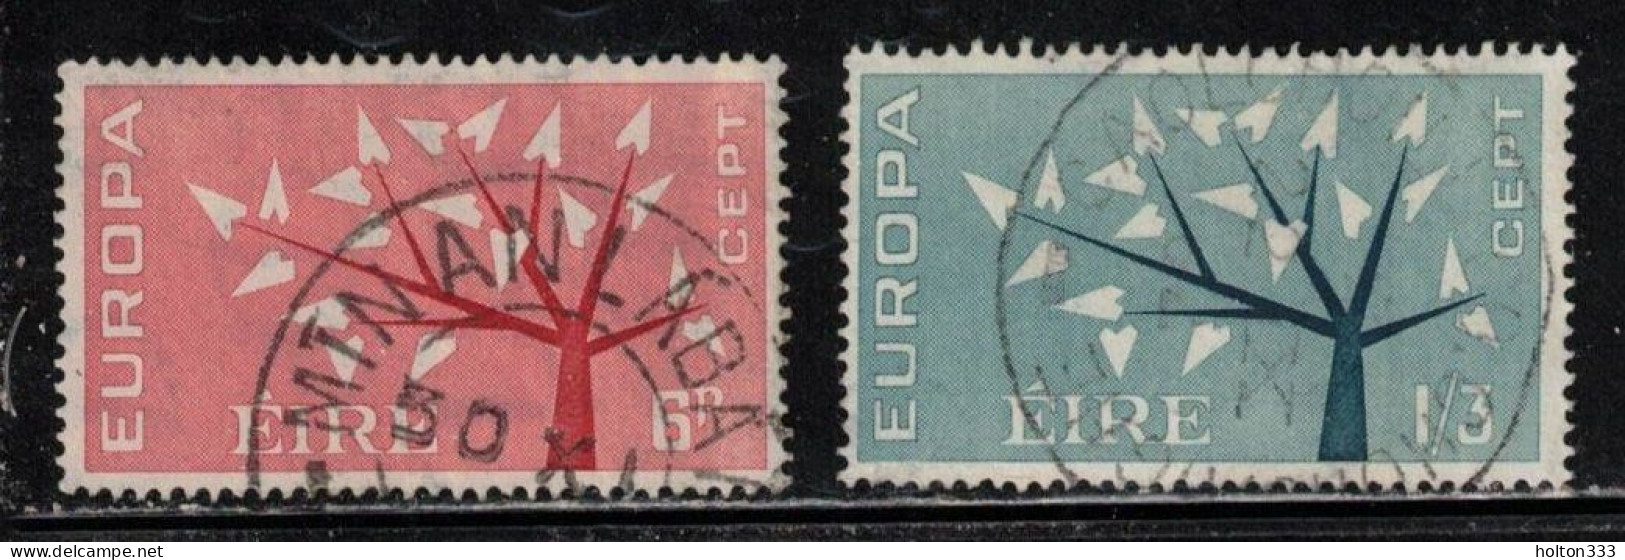 IRELAND Scott # 184-5 Used - 1962 Europa Issue - Used Stamps